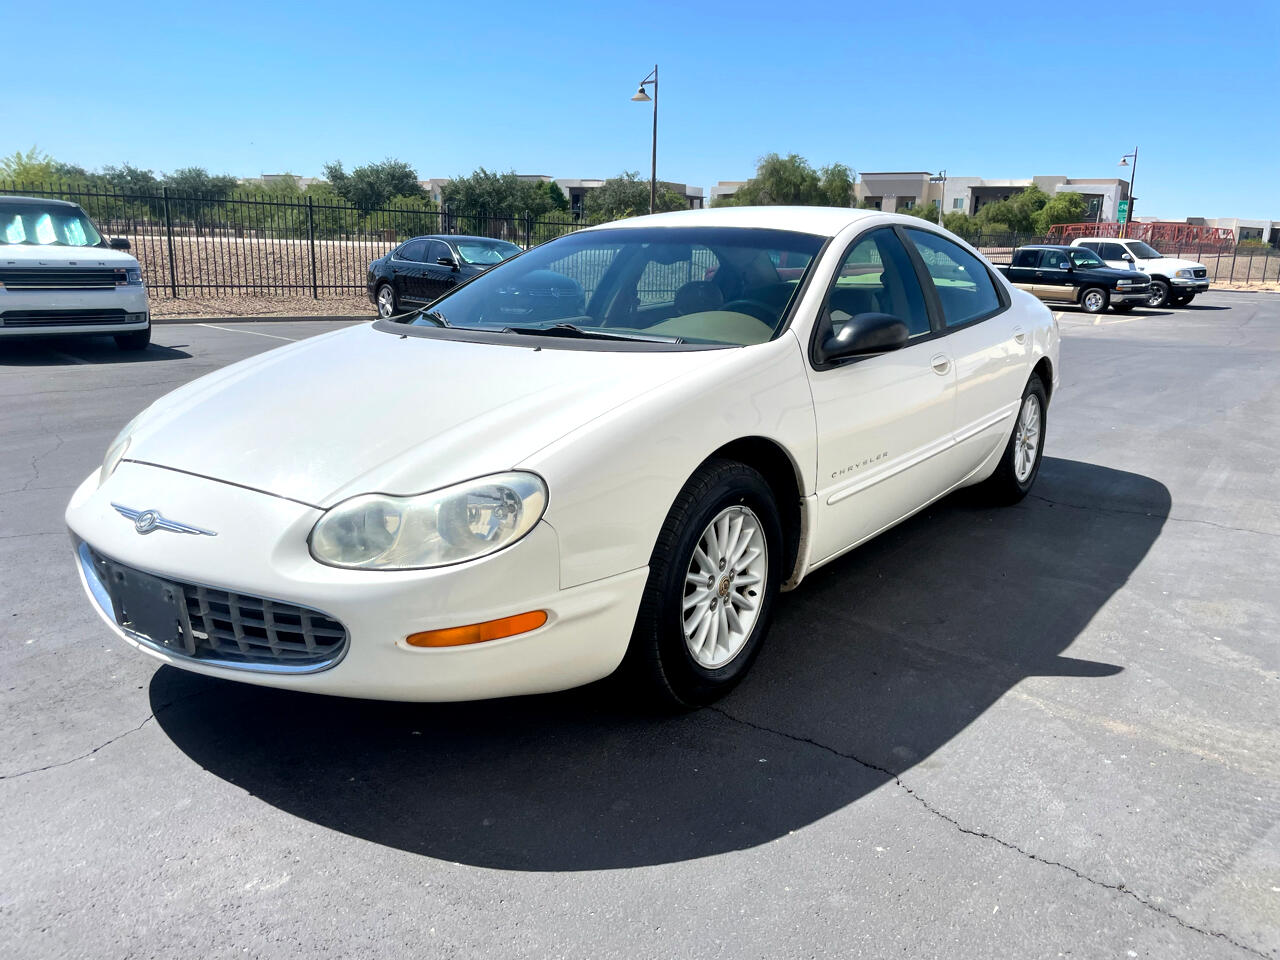 Used 2000 Chrysler Concorde 4dr Sdn LXi for Sale in Chandler AZ 85286  Auction Block Auto